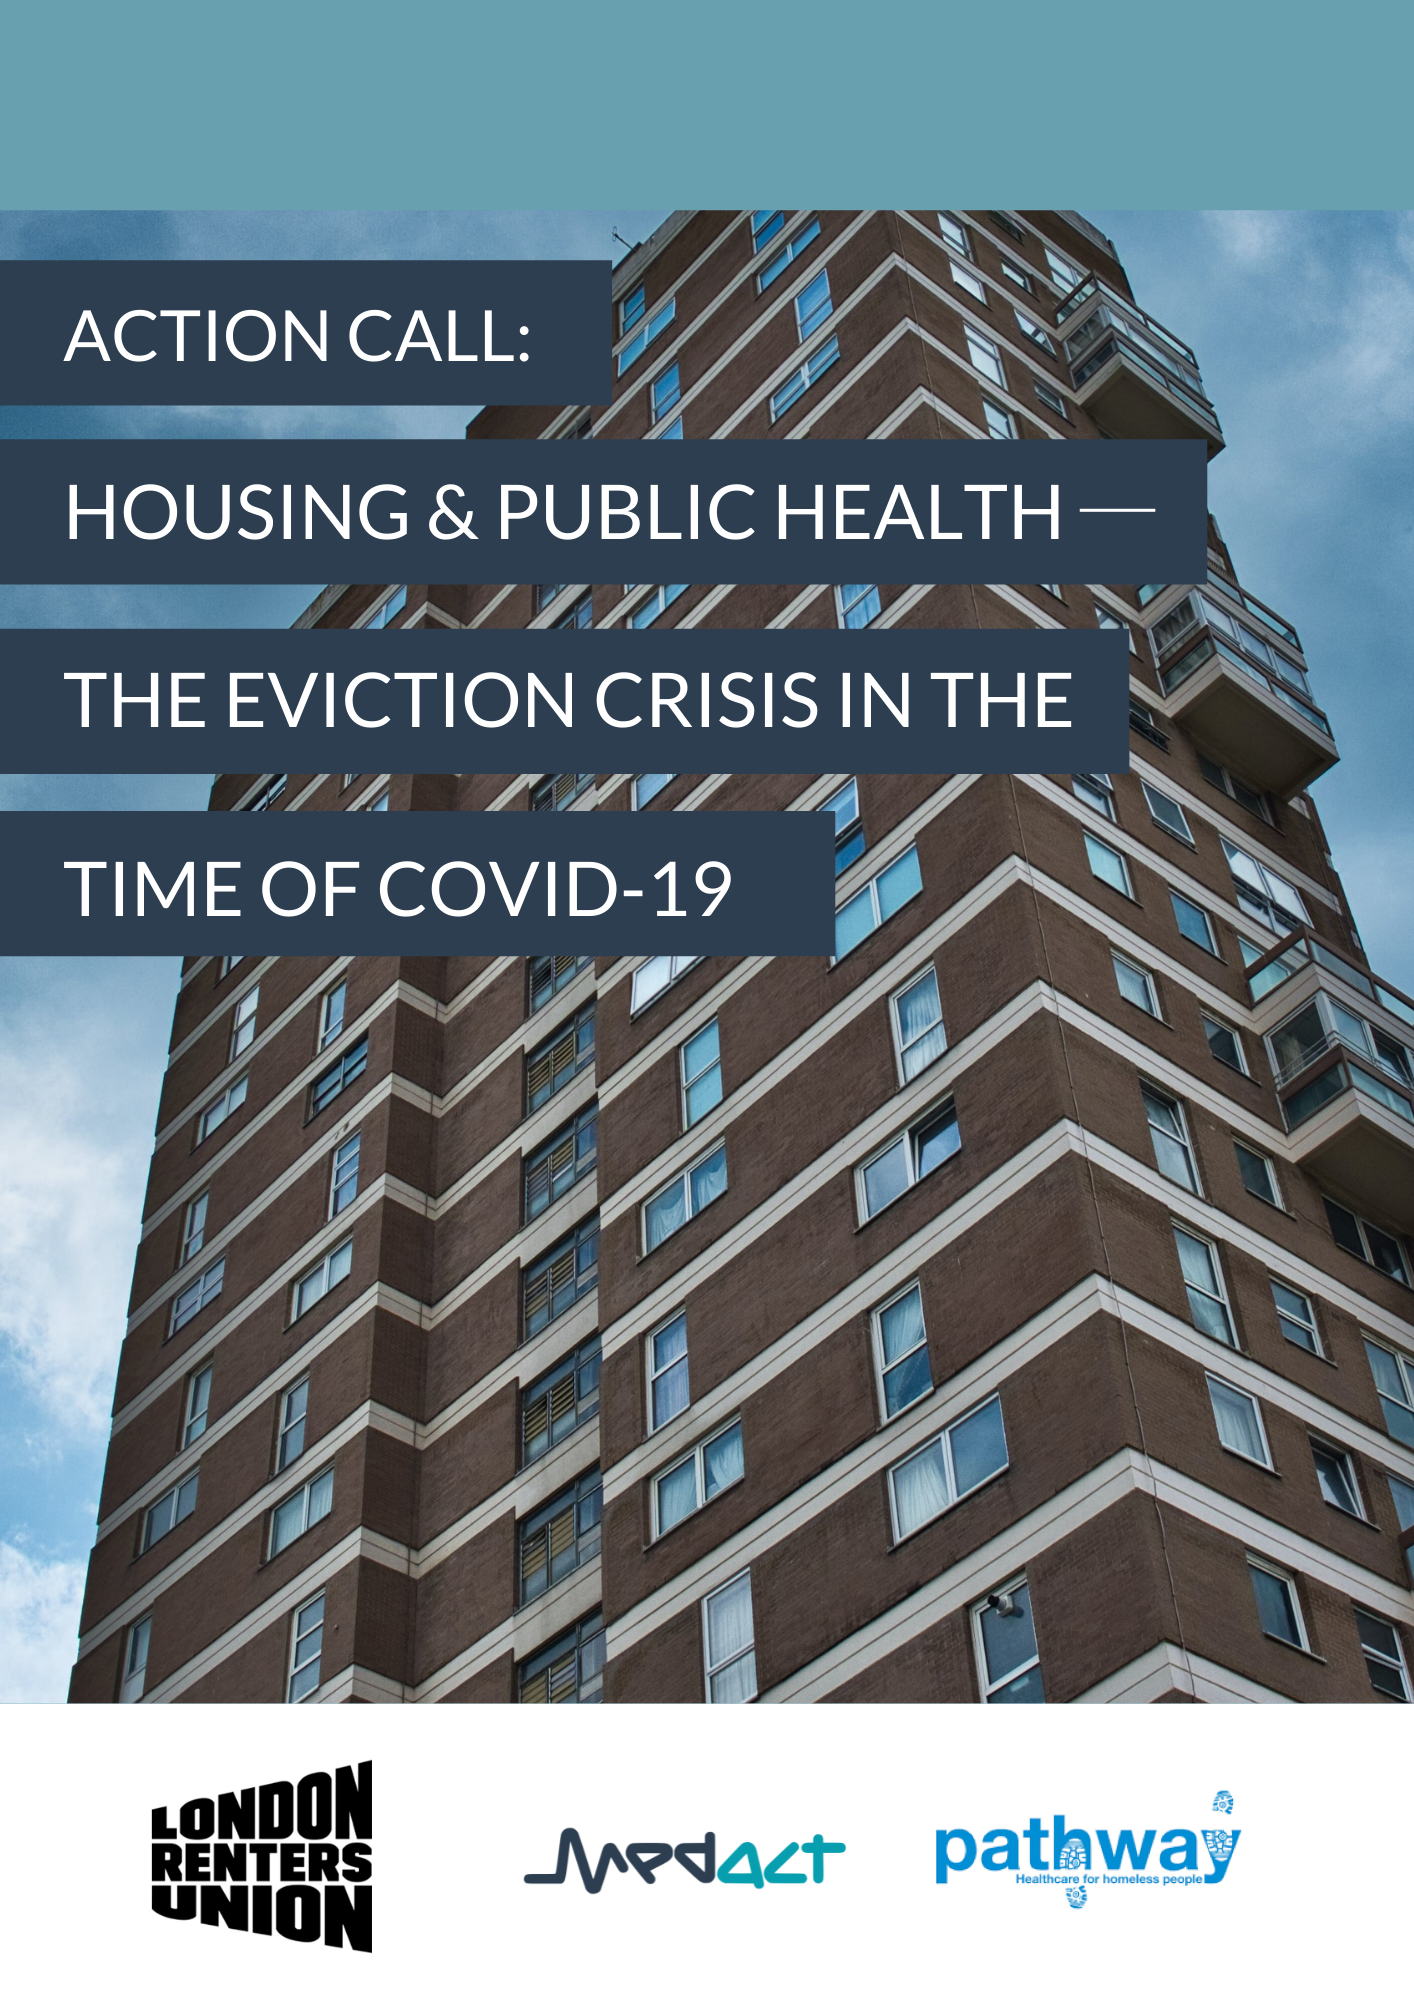 Action Call: Housing & public health ─ the eviction crisis in the time of COVID-19